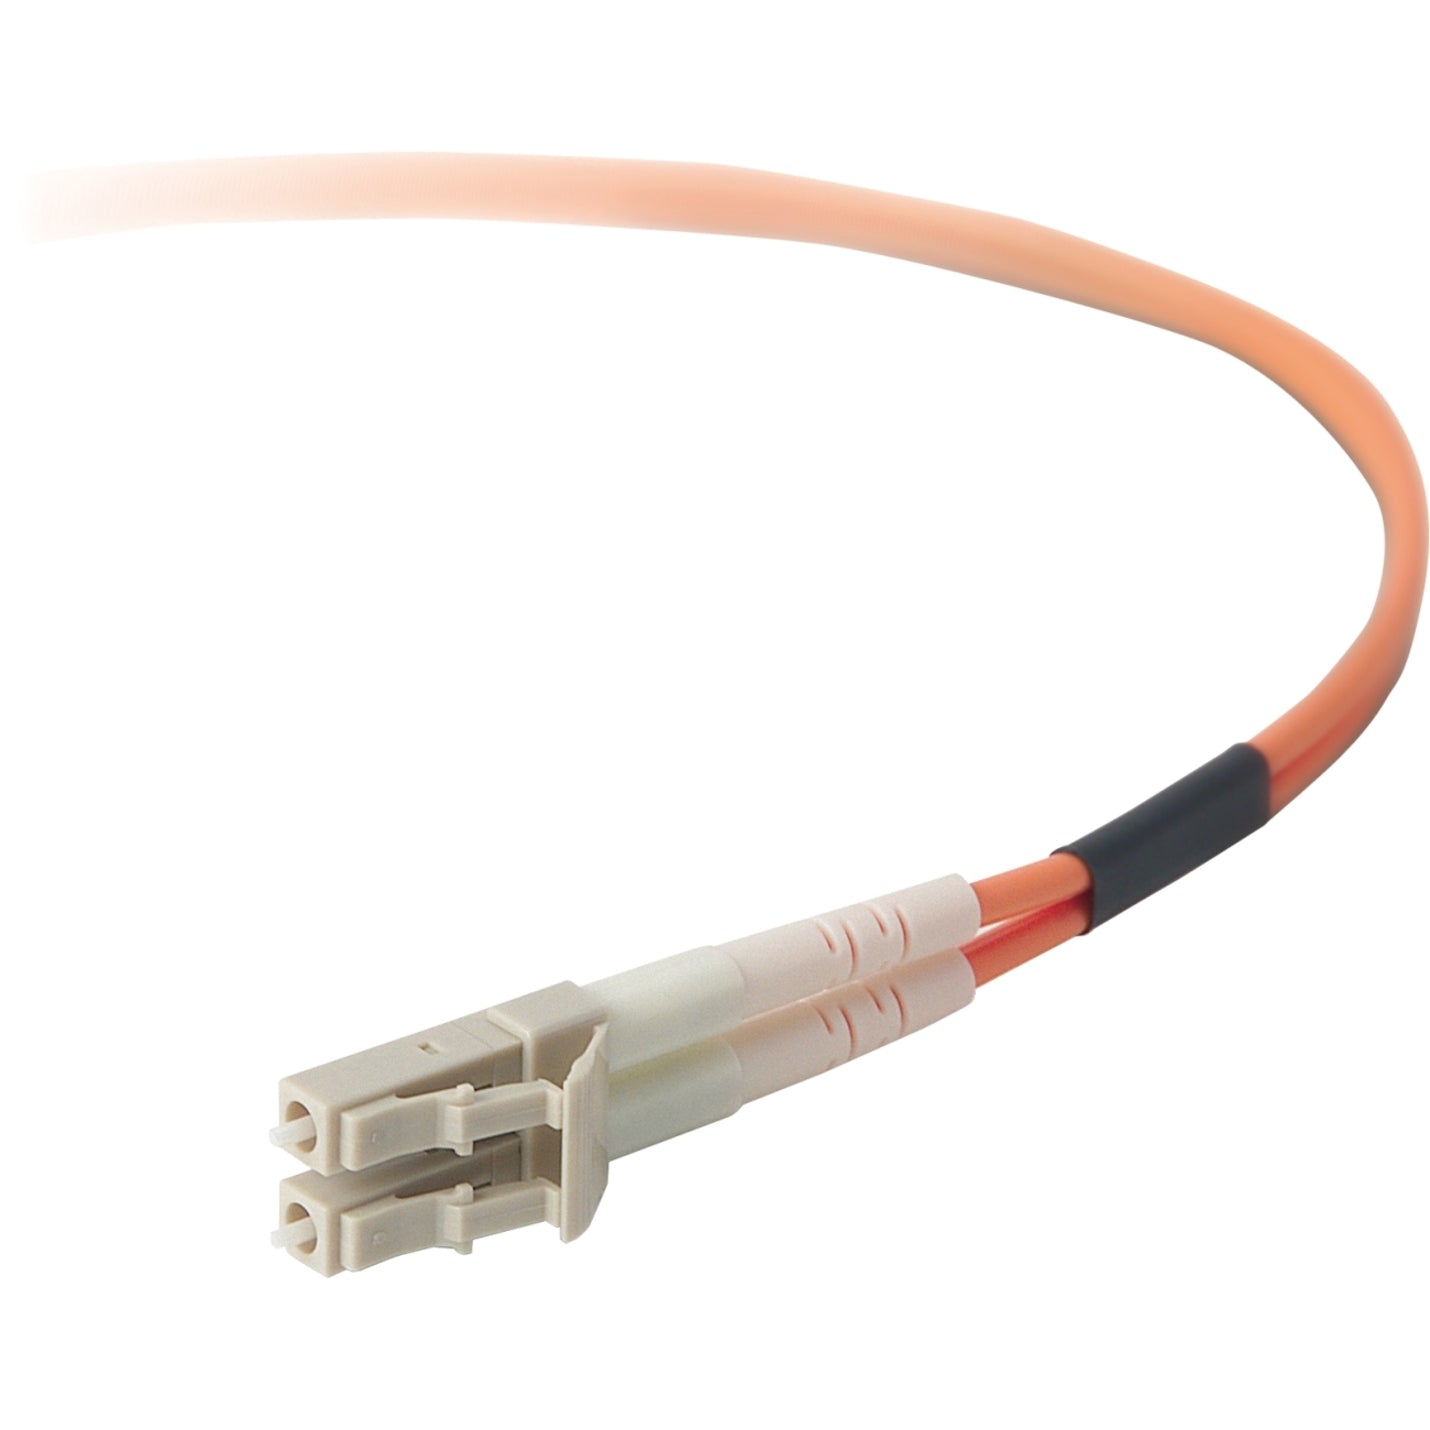 Belkin F2F202LL-03M Fiber Optic Patch Cable, 9.84 ft, Reliable Performance